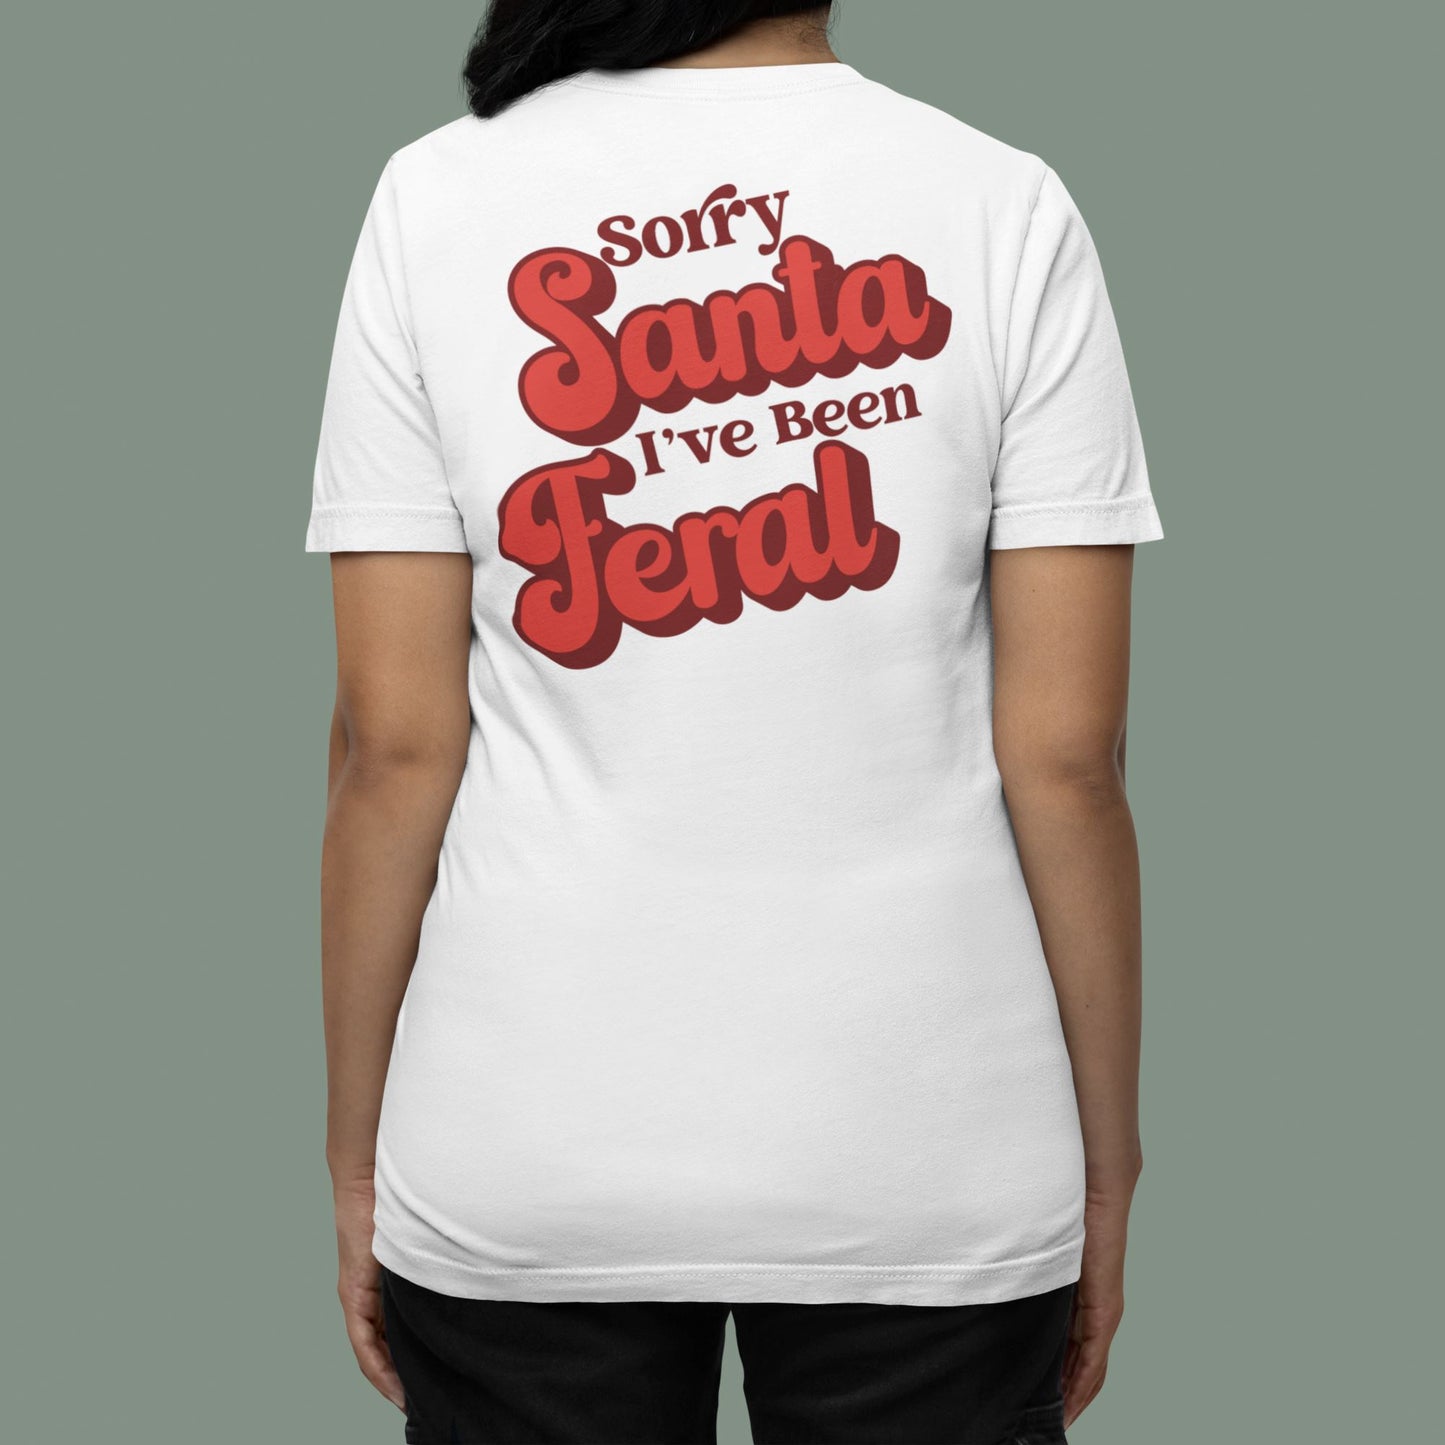 Sorry Santa Ive Been Feral T-shirt